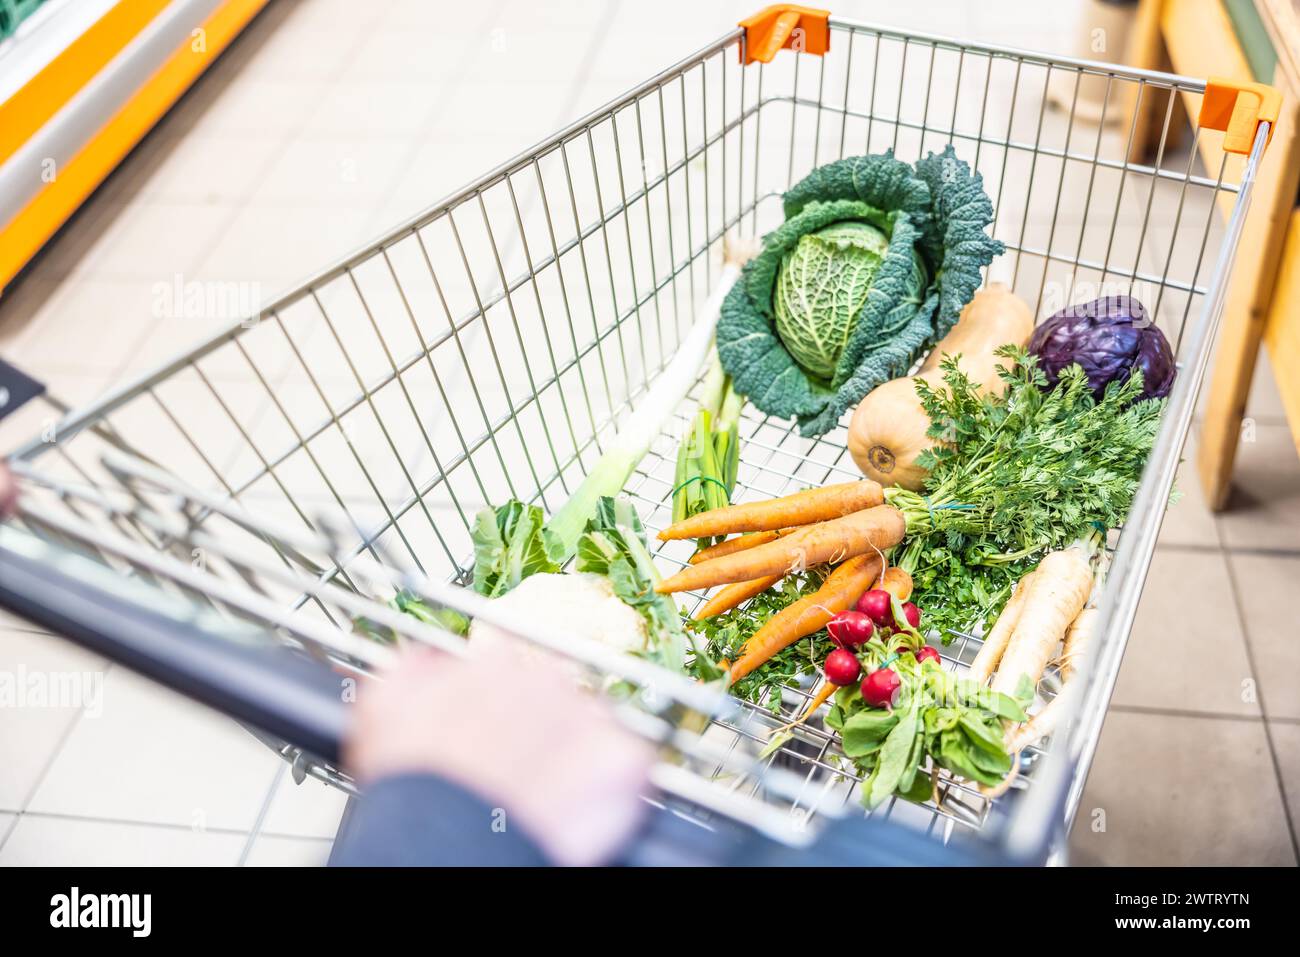 A view of the shopping cart in which fresh vegetables are stacked. Stock Photo